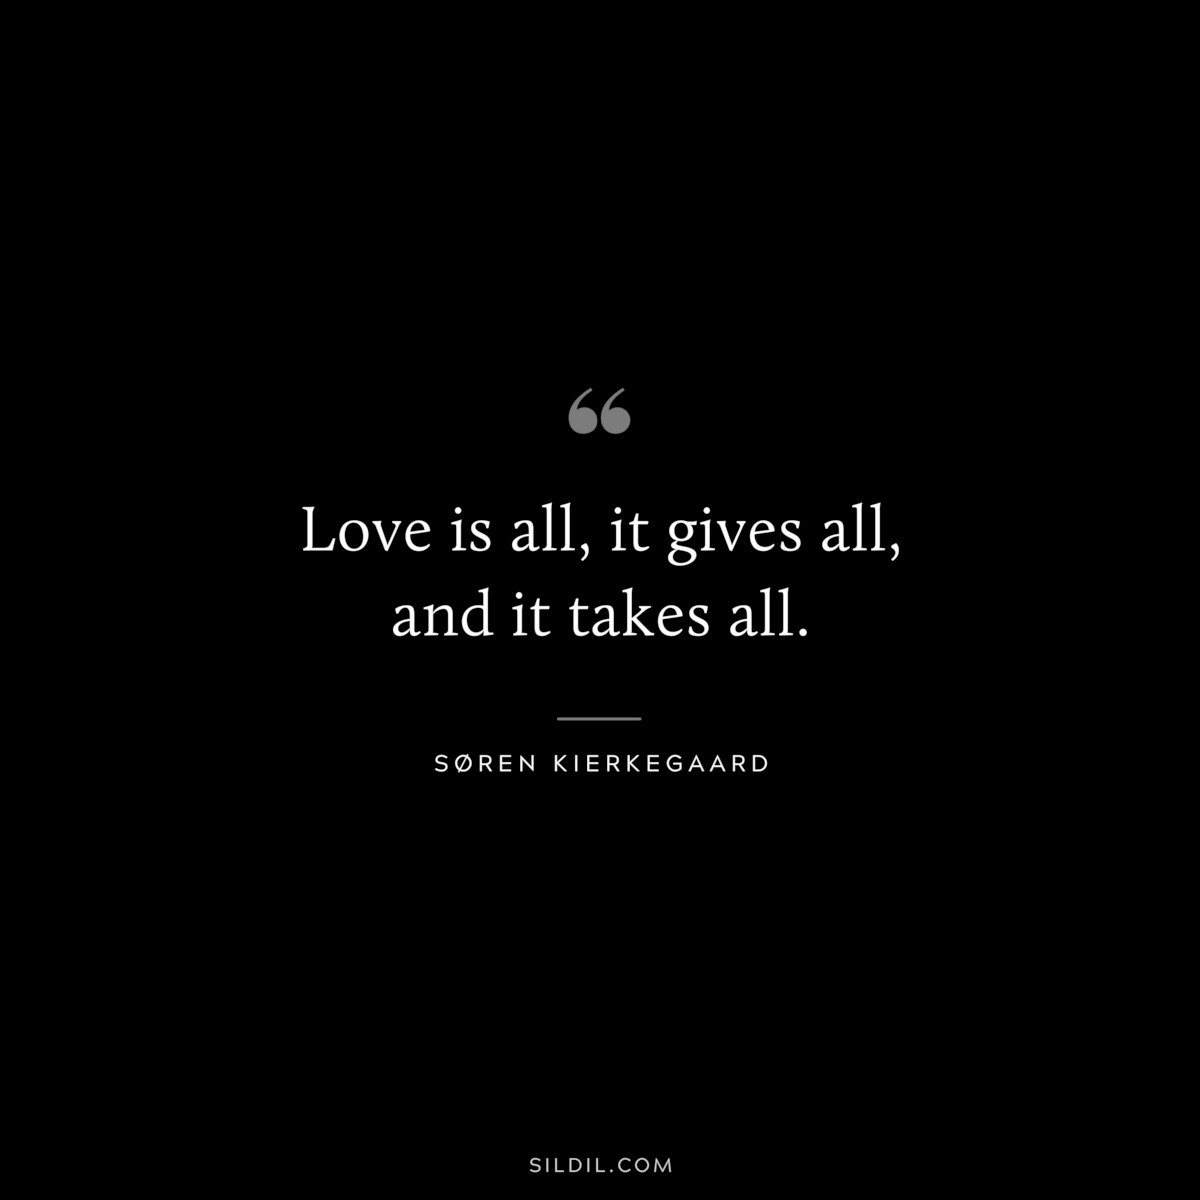 Love is all, it gives all, and it takes all. ― Søren Kierkegaard